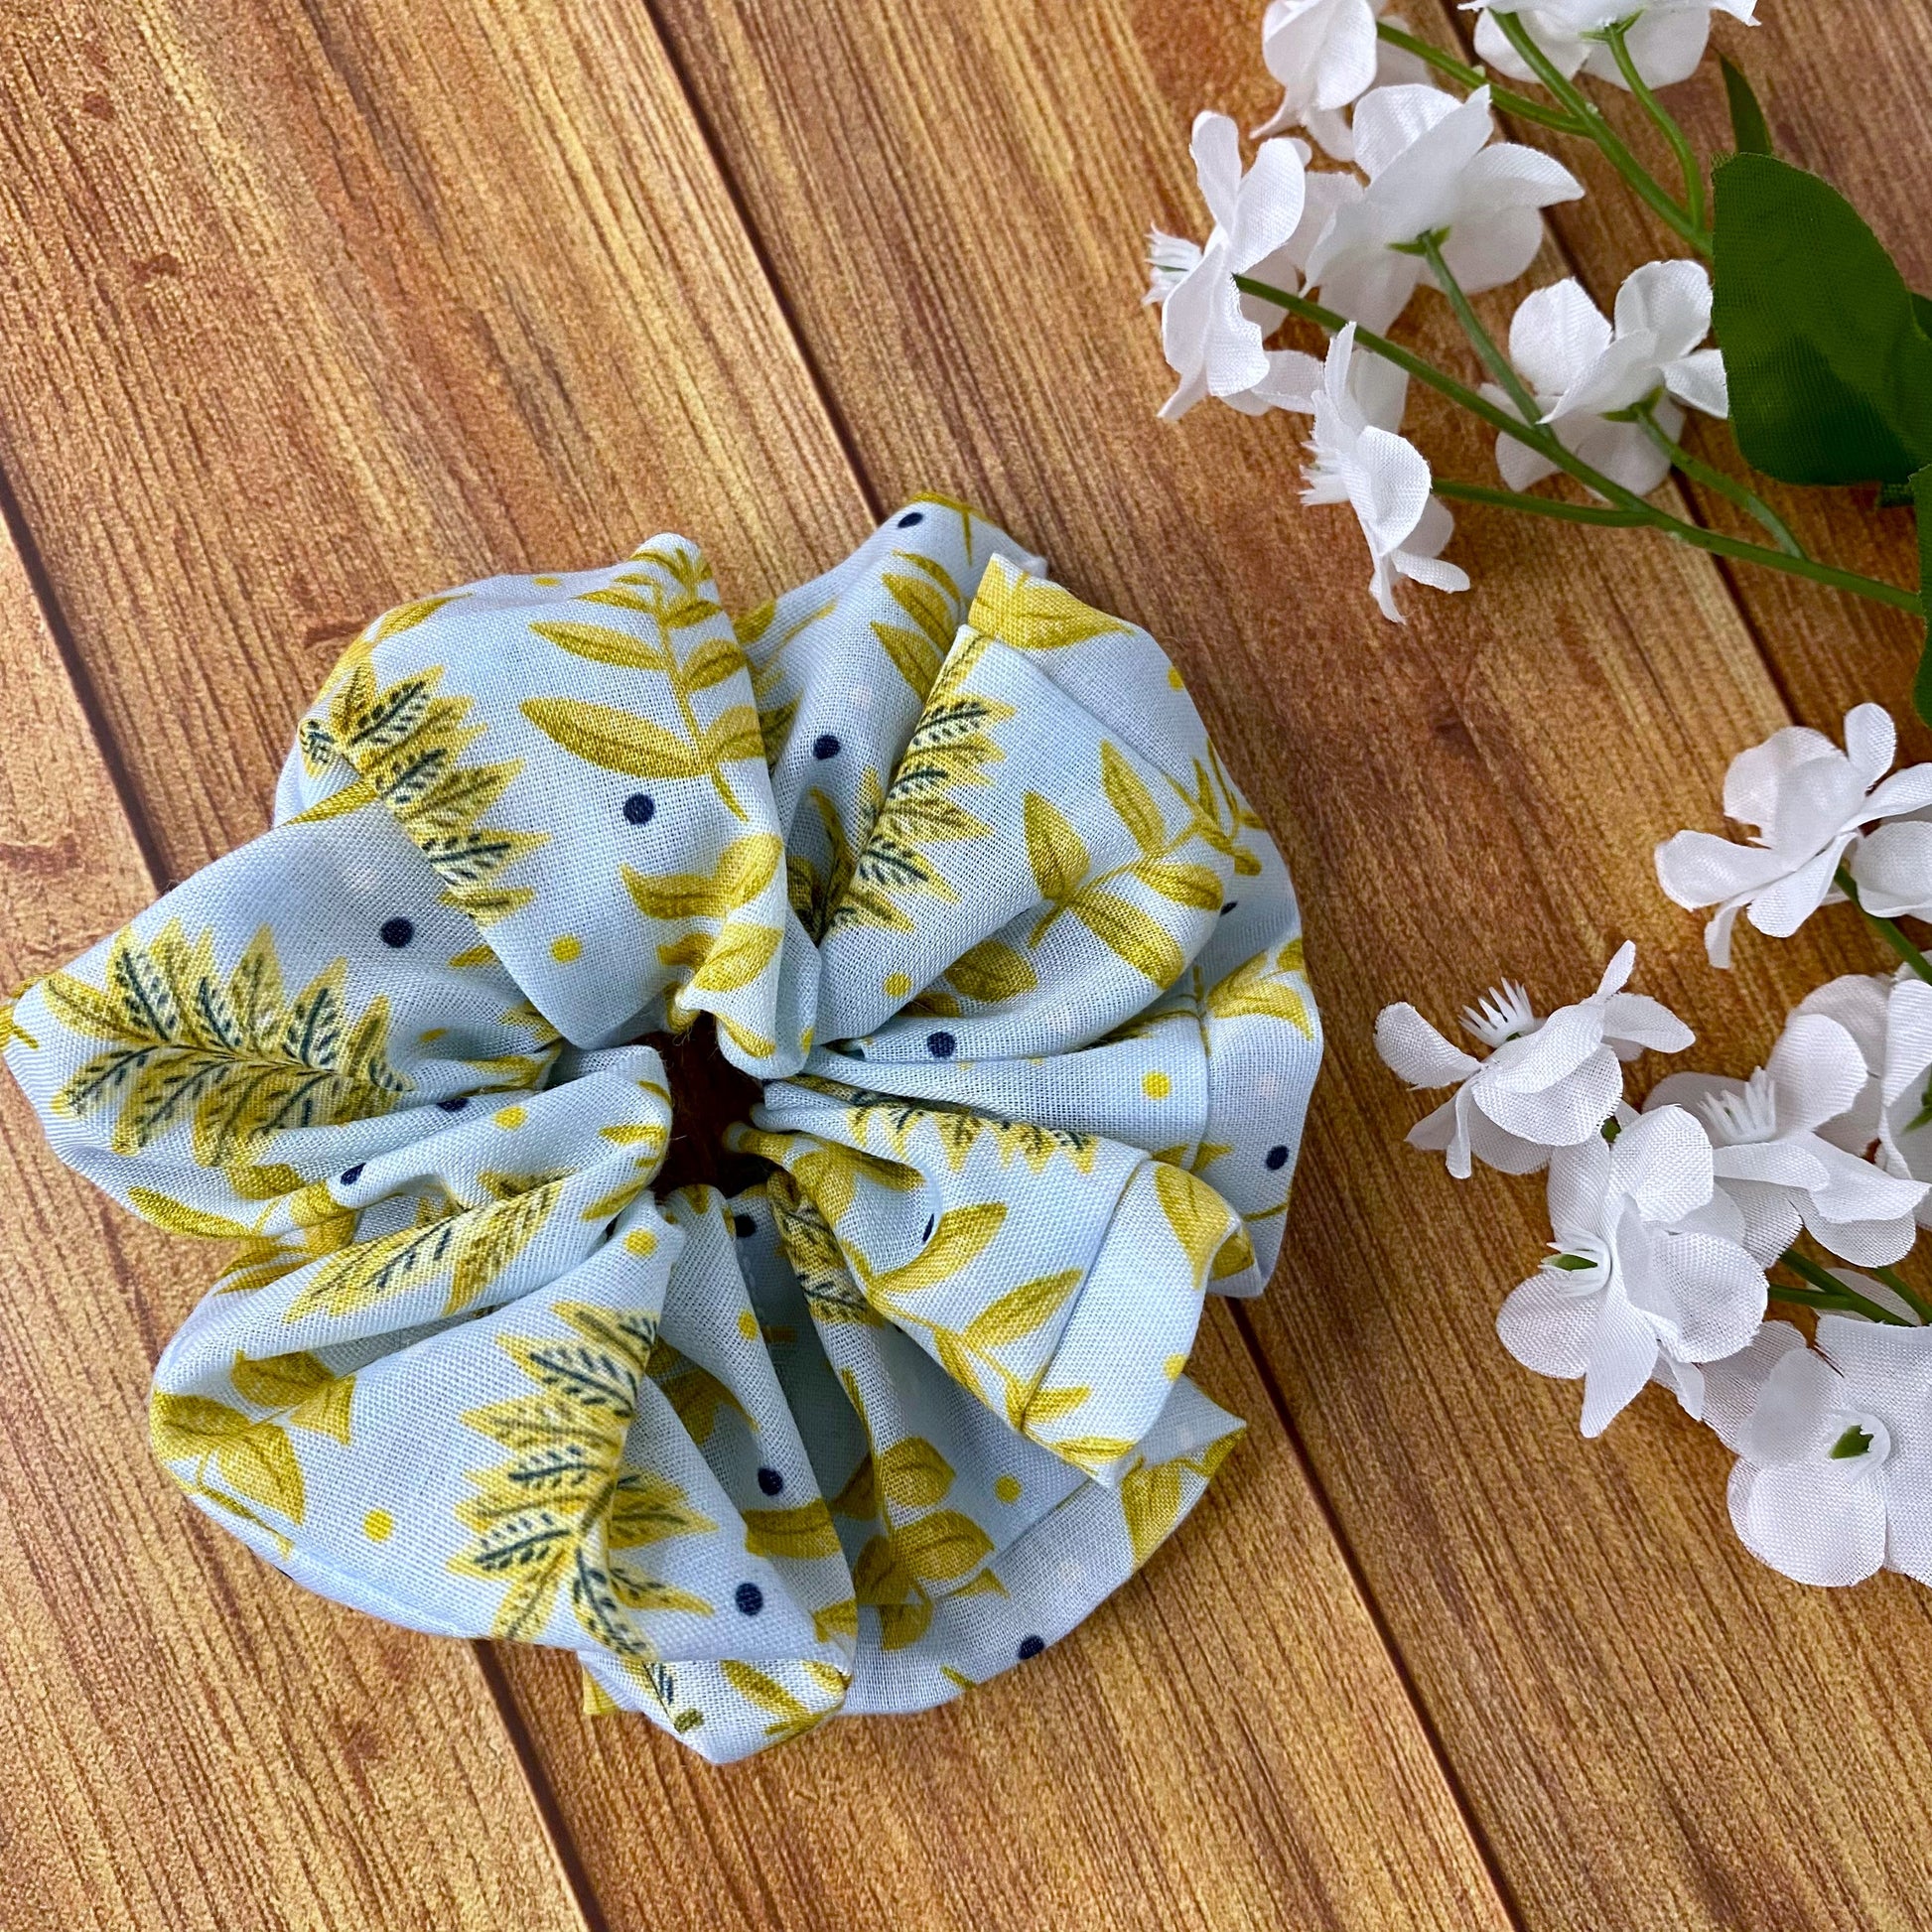 yellow foliaged patterned scrunchie on wood surface with flowers around it